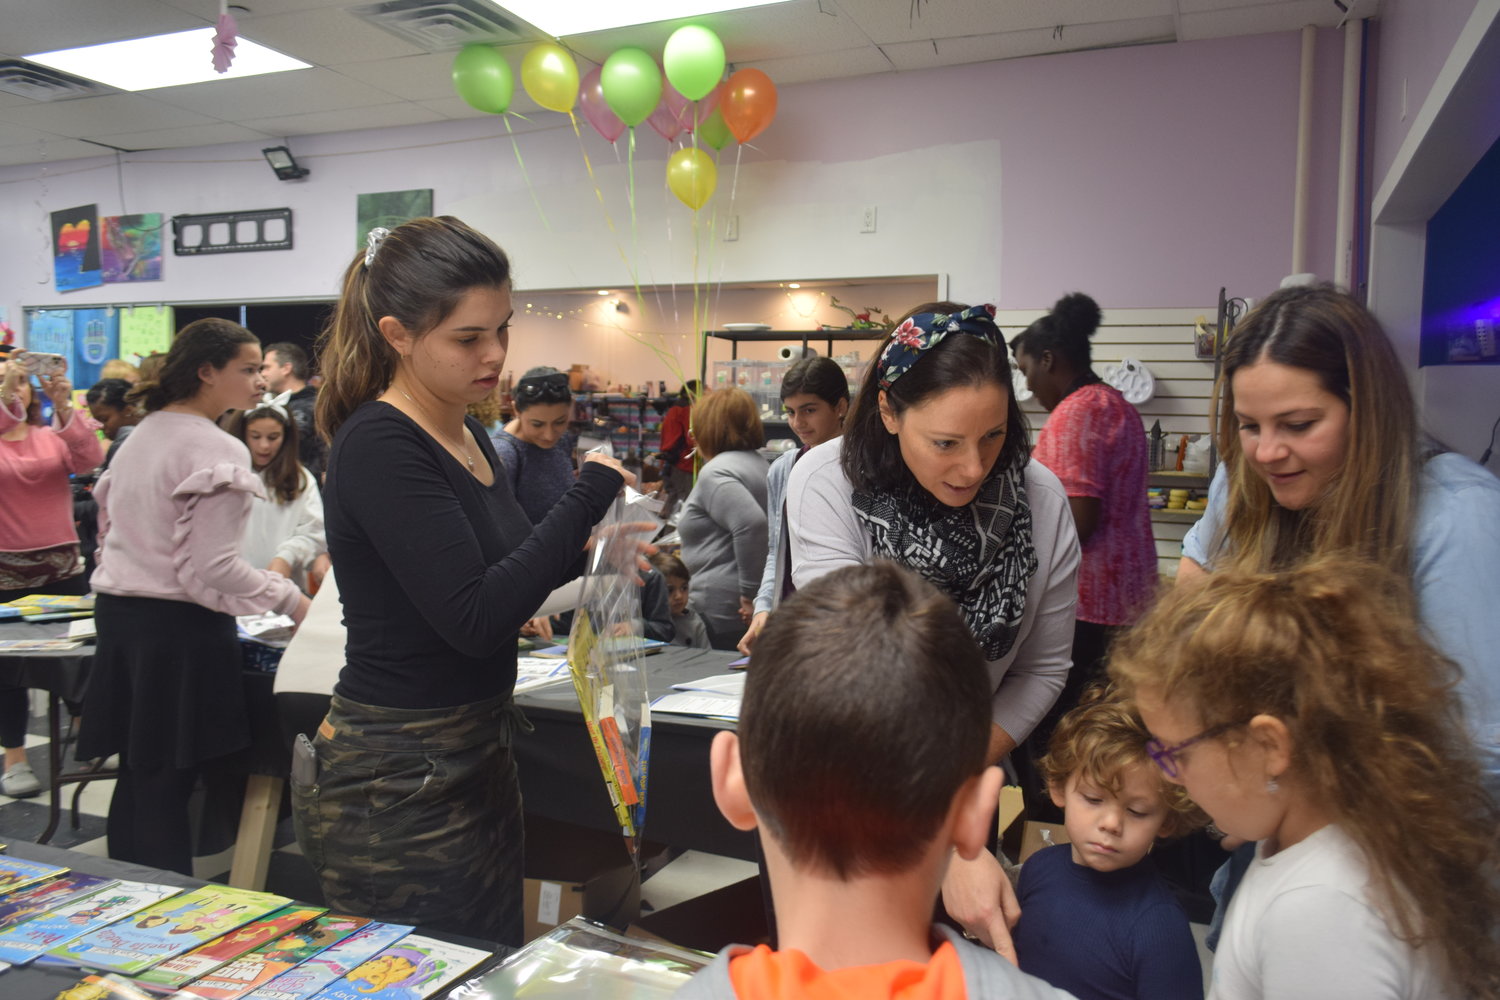 Volunteers Susanna Horowitz, left and Adi Carucci, center, helped a family wrap books at the Hindi’s Libraries Gobble Gobble Book Fest on Nov. 17.